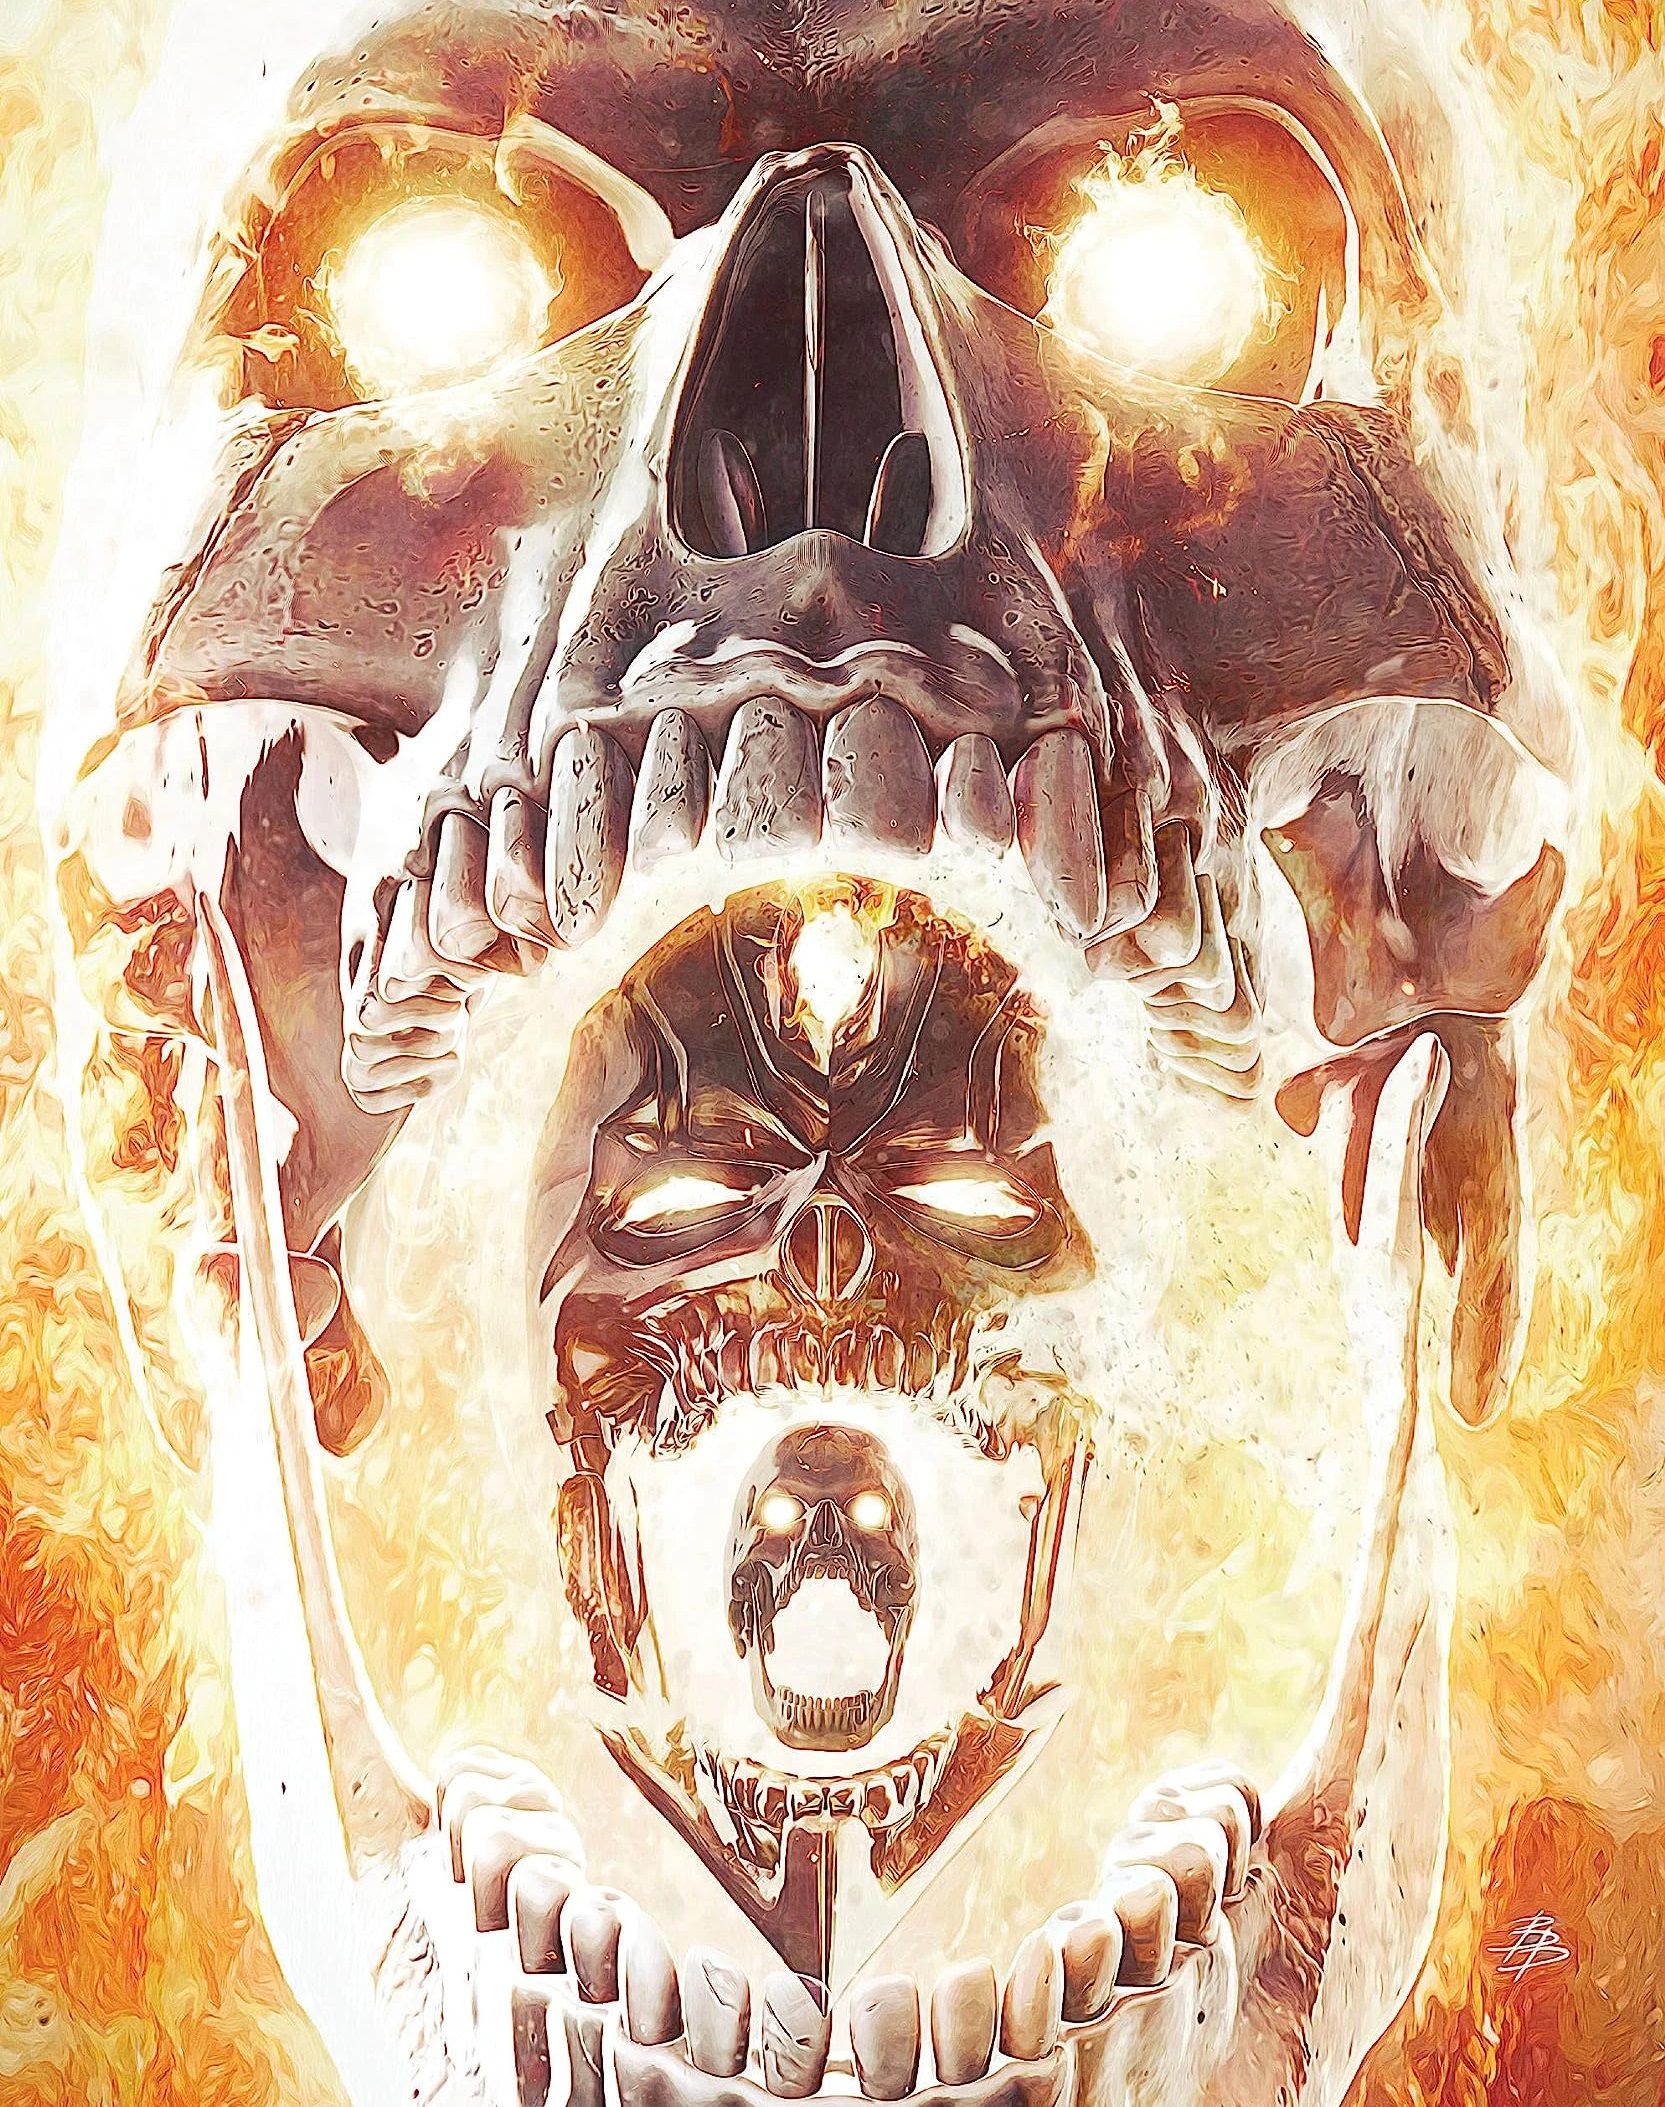 Ghost Rider Unleashes a Major New Power That Betrays His Purpose